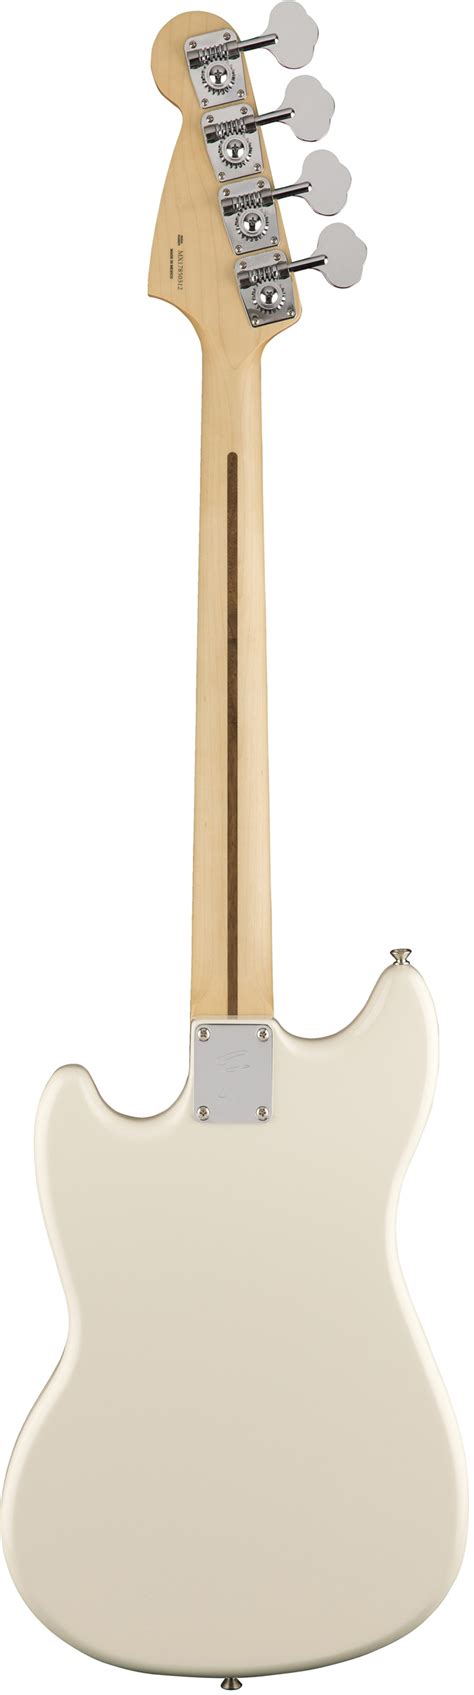 Fender Offset Mustang Bass Pj Olympic White Pf Guitar Zstores